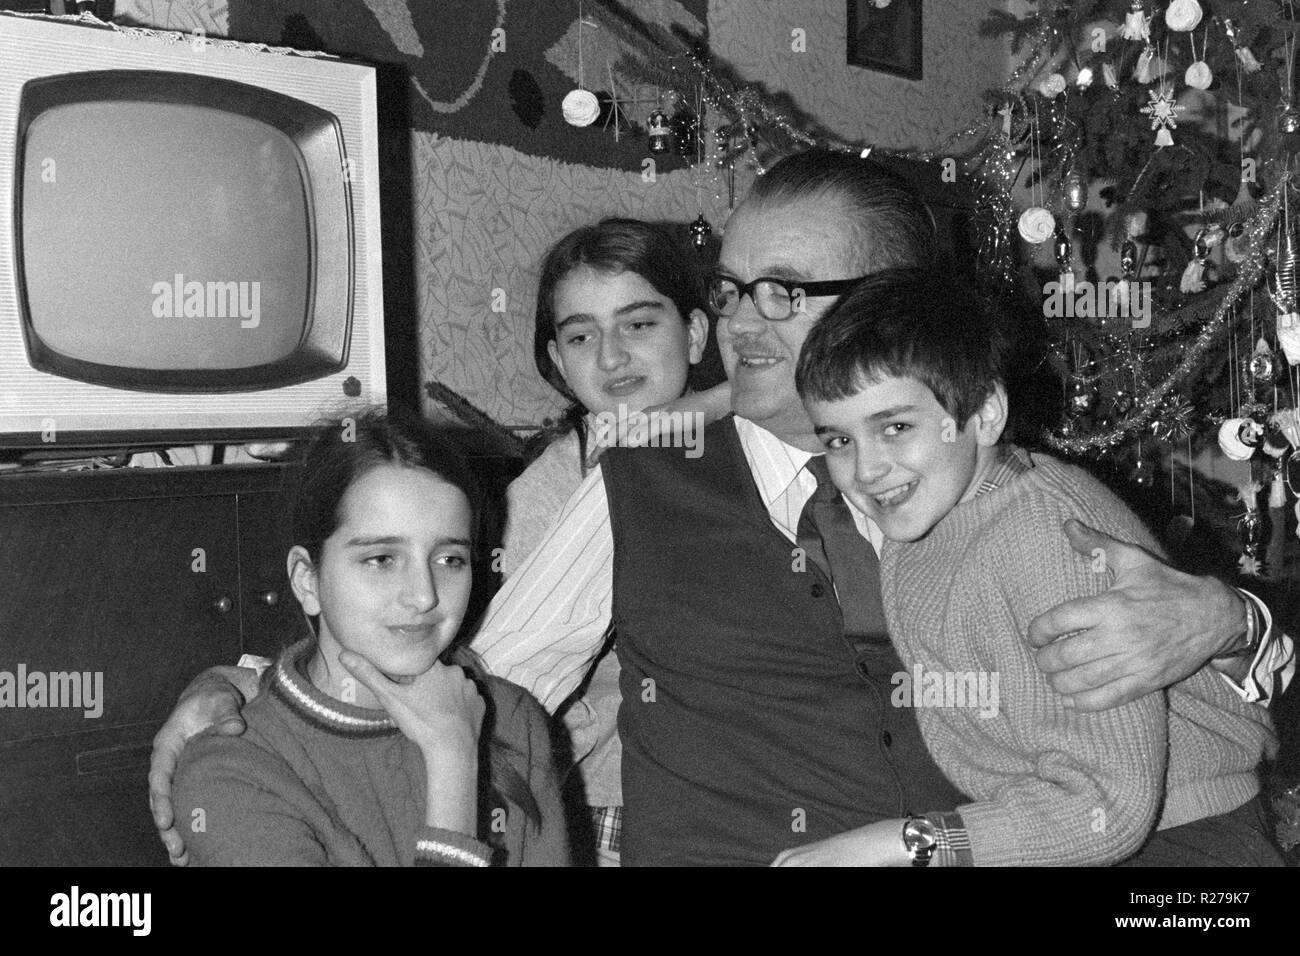 grandfather with grandchildren next to vintage television set at christmas in 1960s hungary Stock Photo